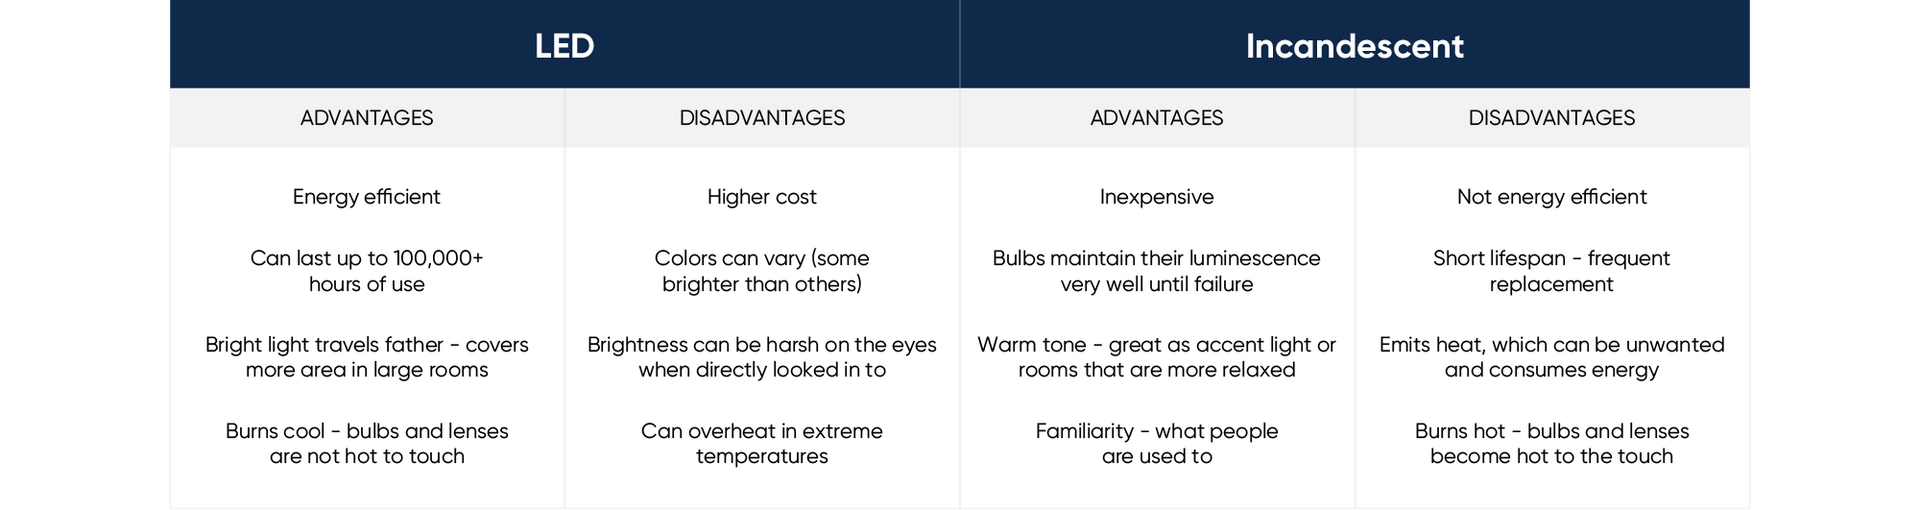 chart showing the advantages and disadvantages of LED and incandescent lights